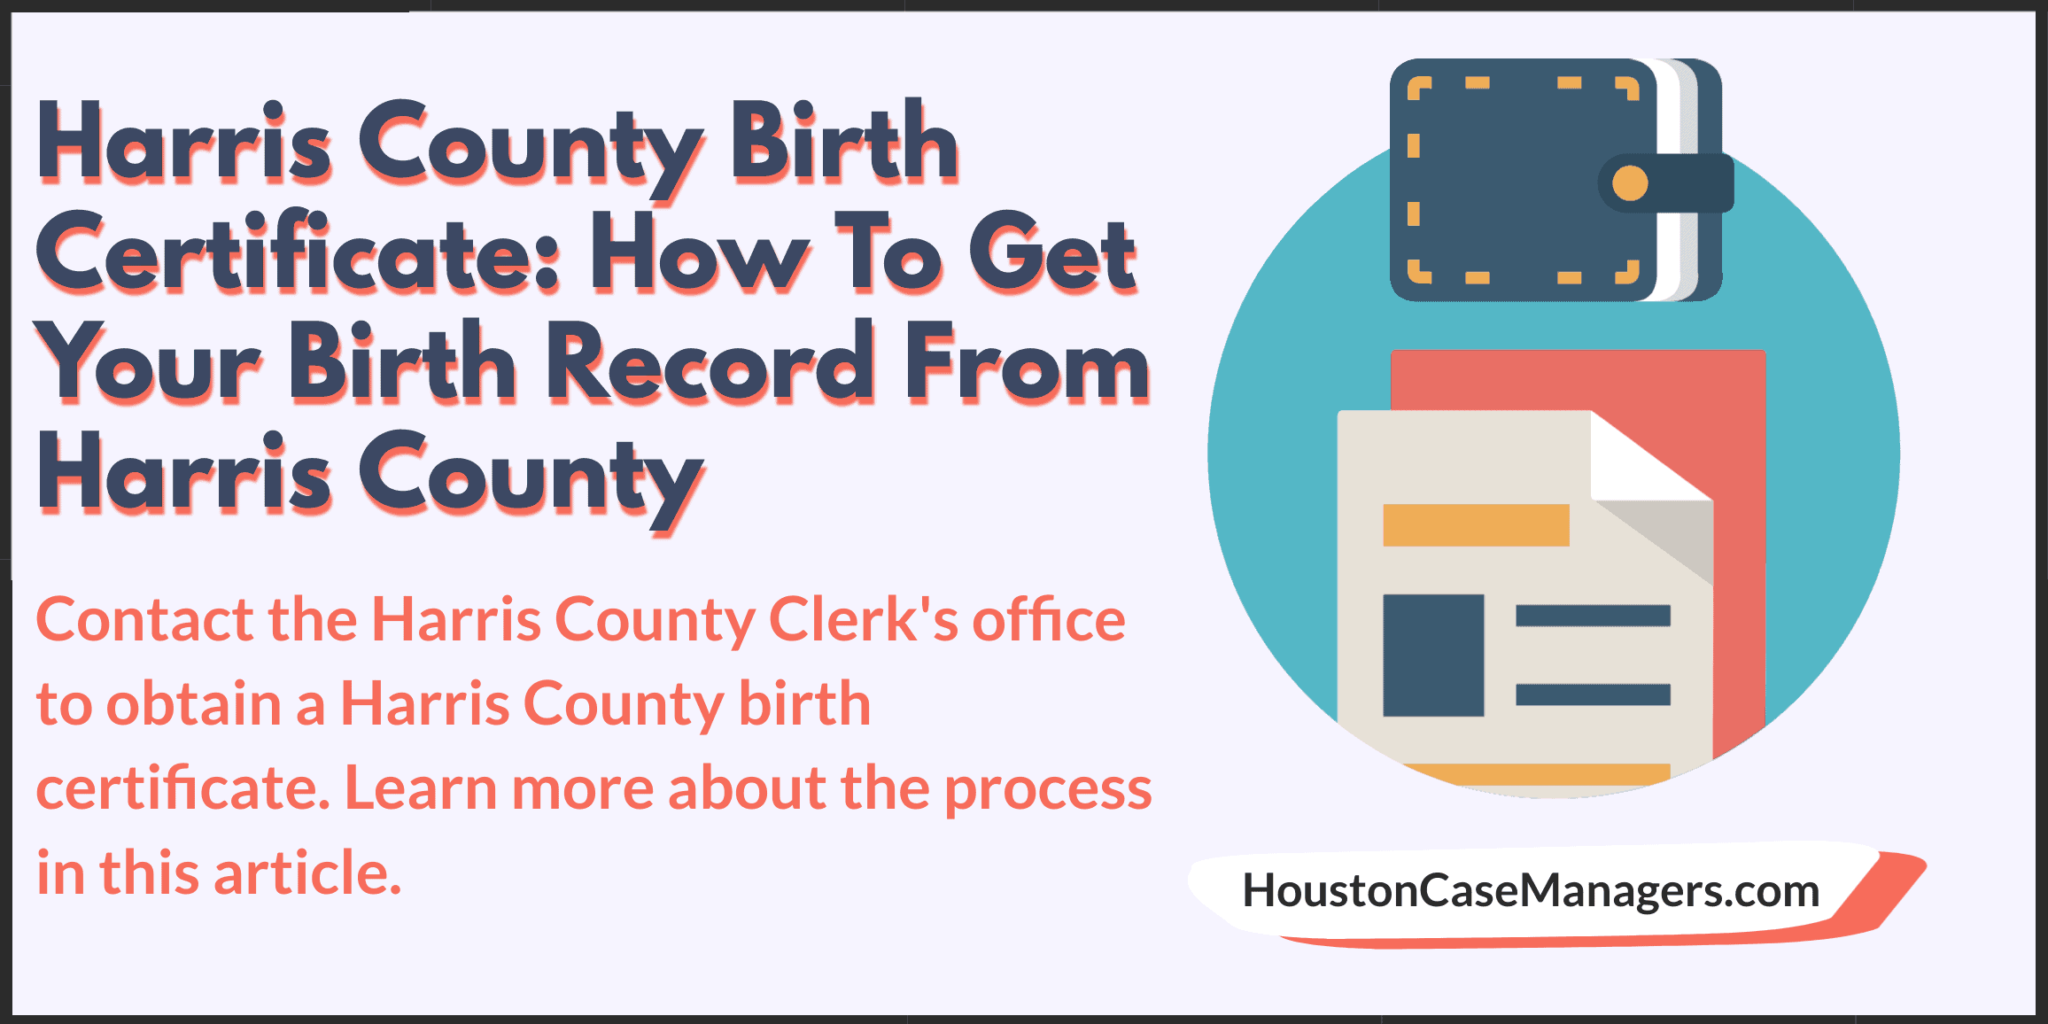 Harris County Birth Certificate: How To Obtain Birth Record In Harris Co.